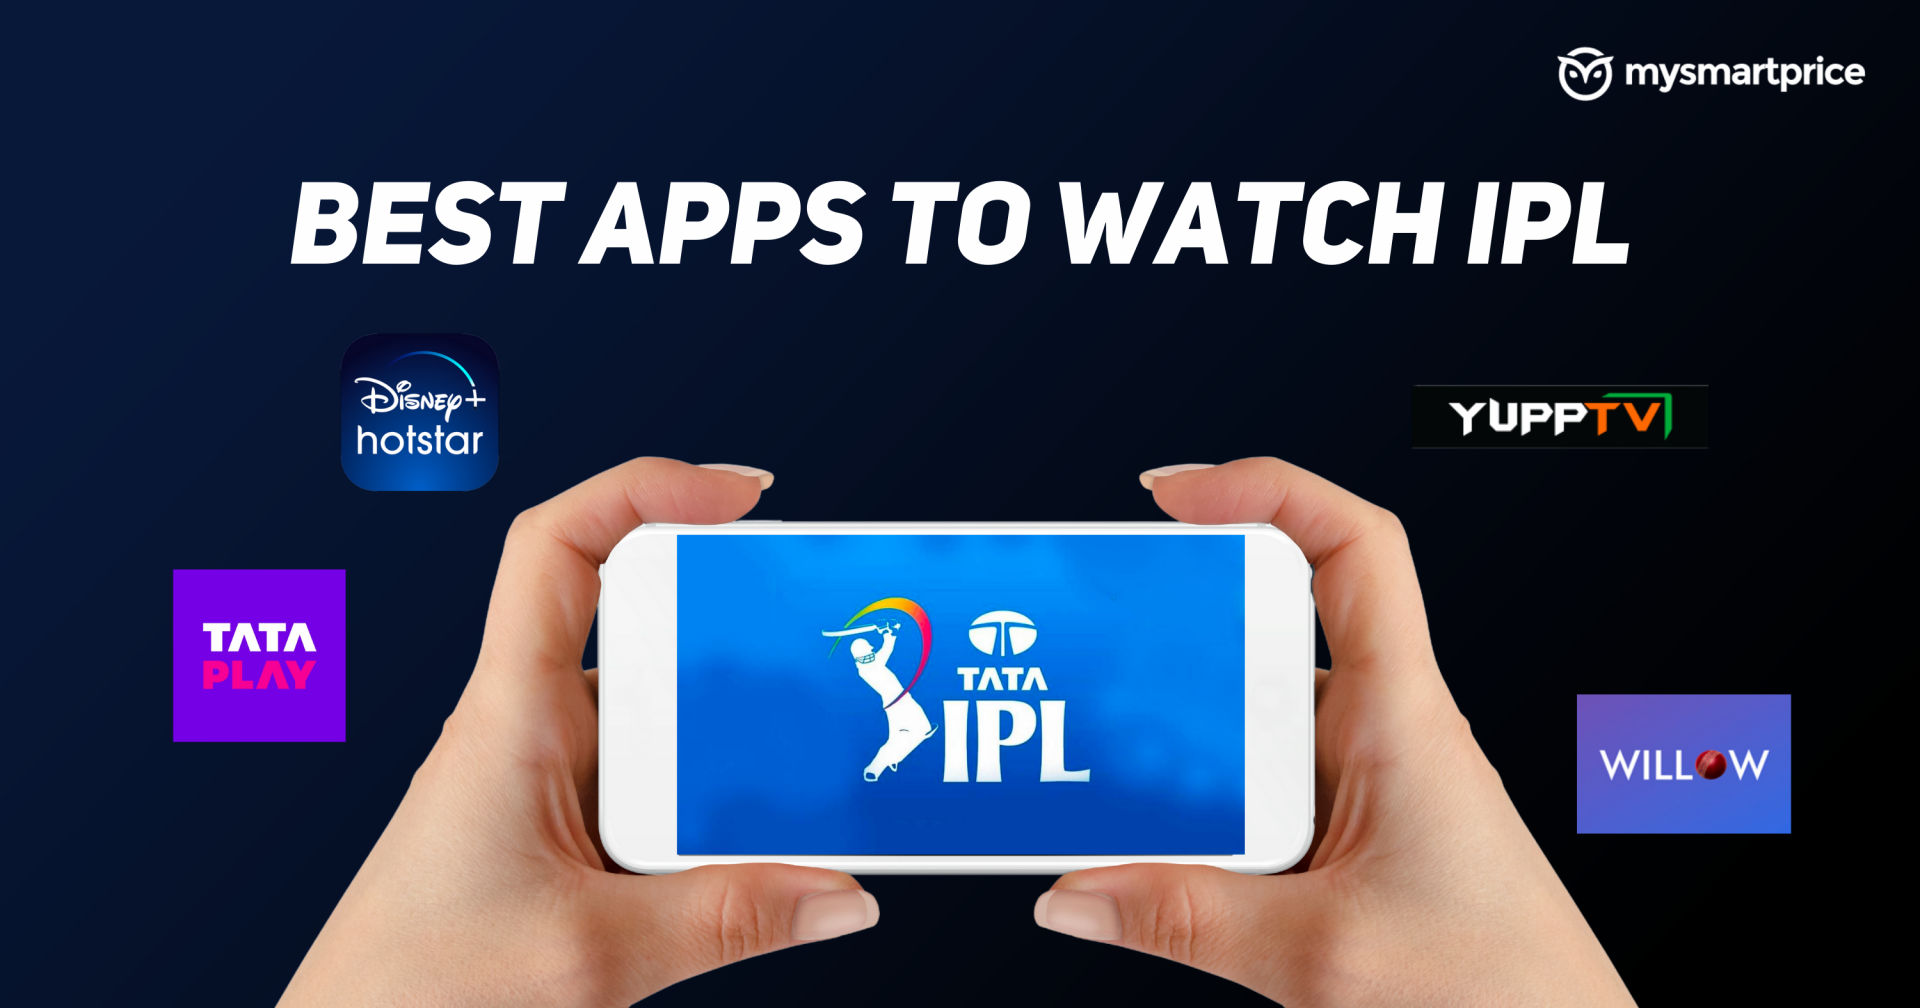 Ipl Live Streaming Apps 2022 Best Apps To Watch Live Ipl Match In